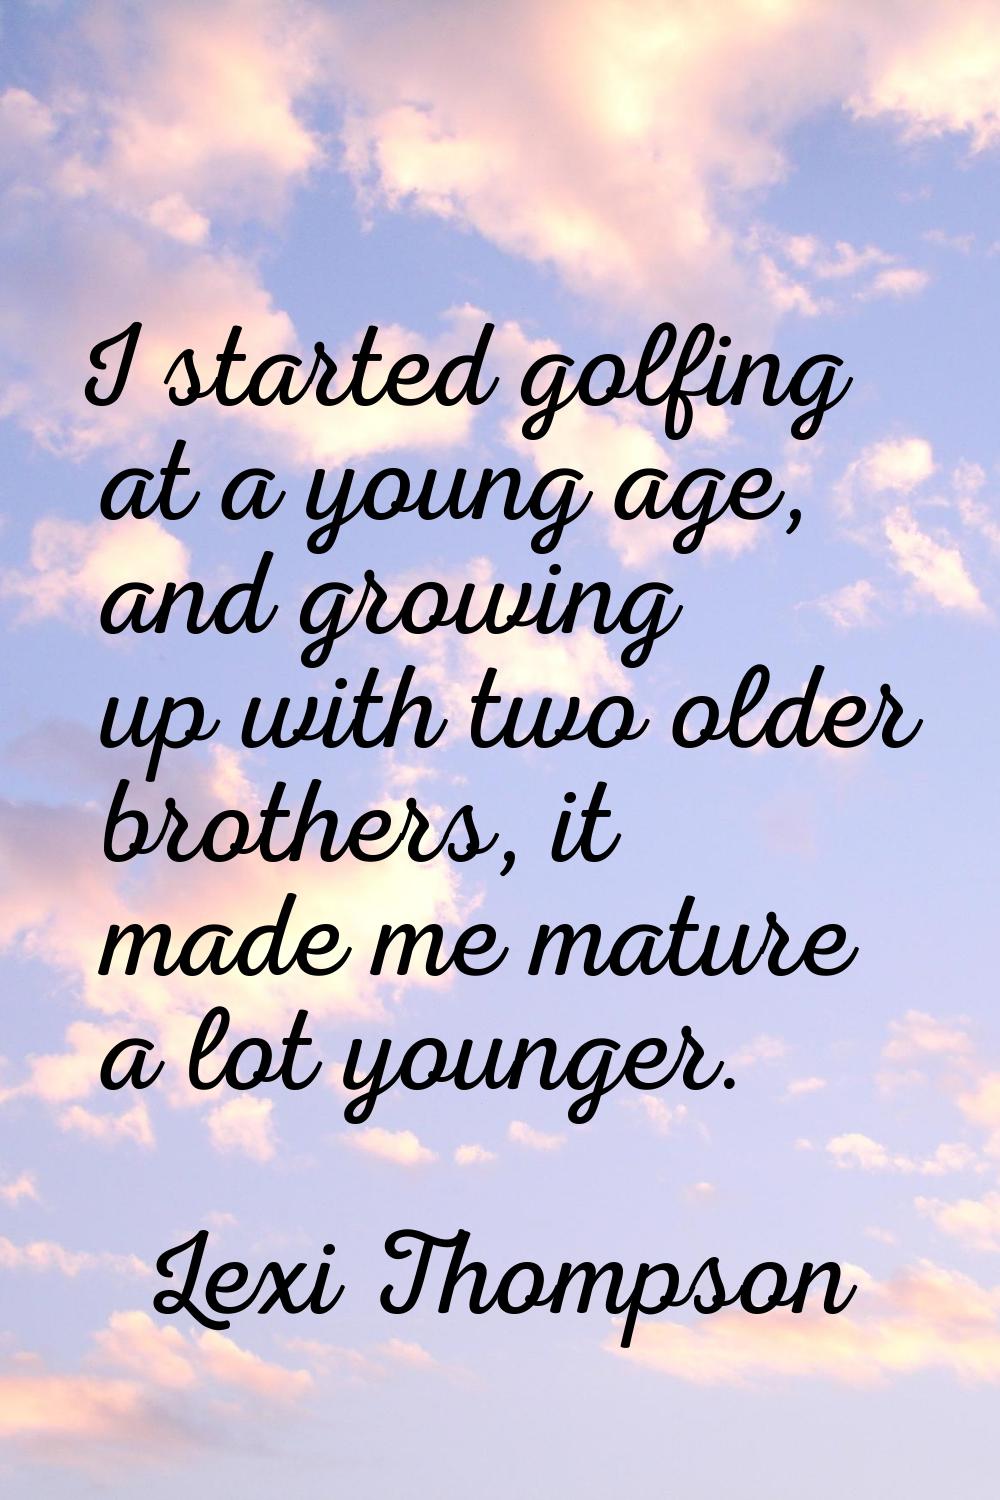 I started golfing at a young age, and growing up with two older brothers, it made me mature a lot y